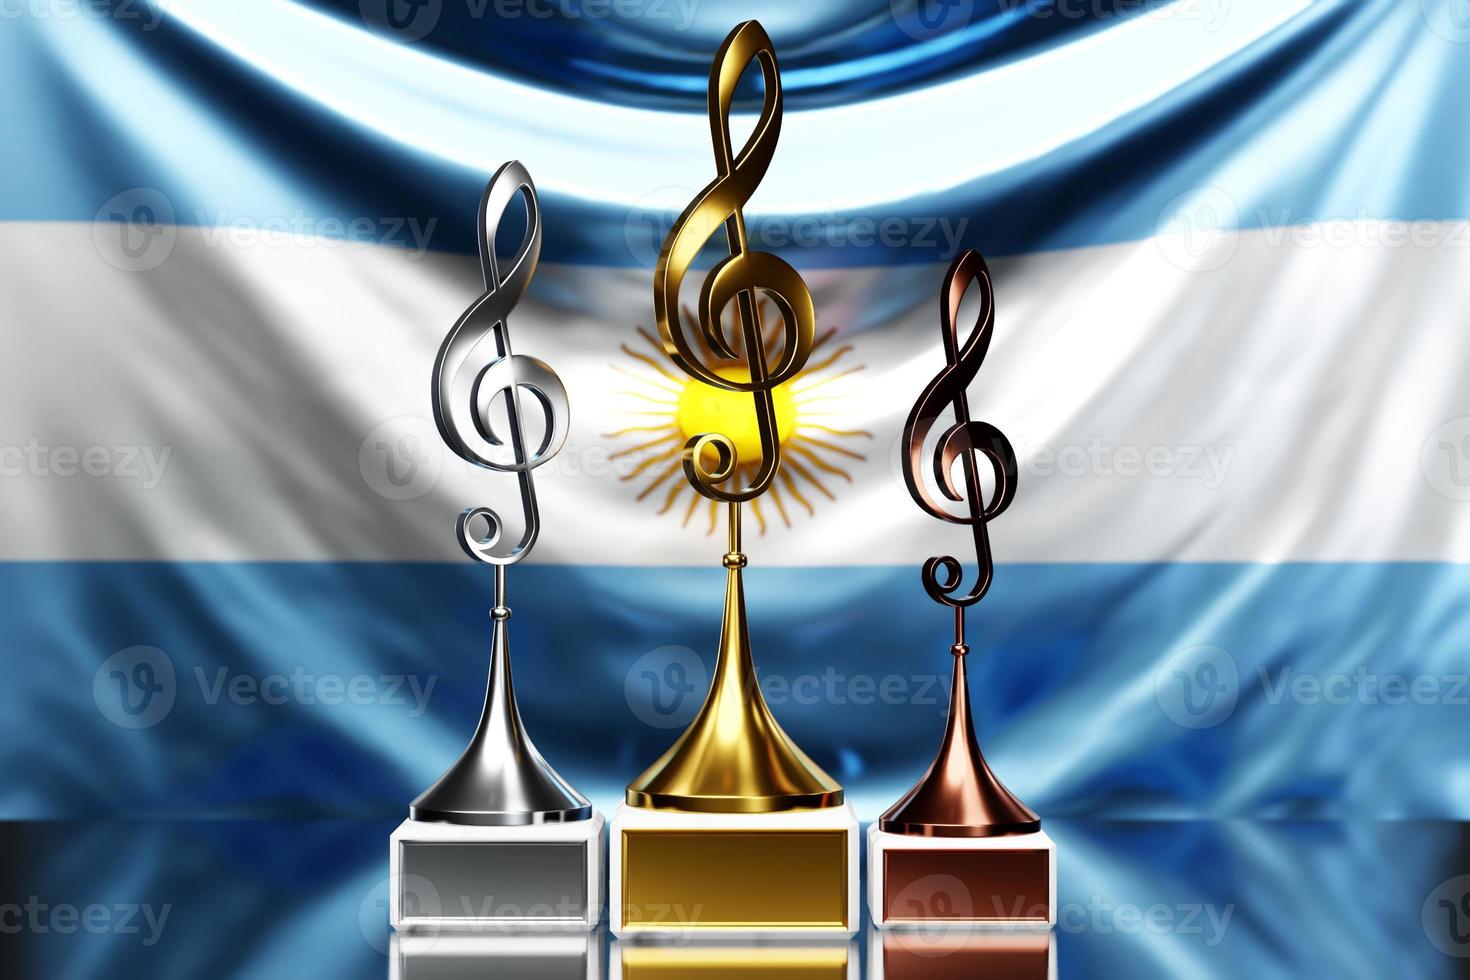 Treble clef awards for winning the music award against the background of the national flag of Argentina photo